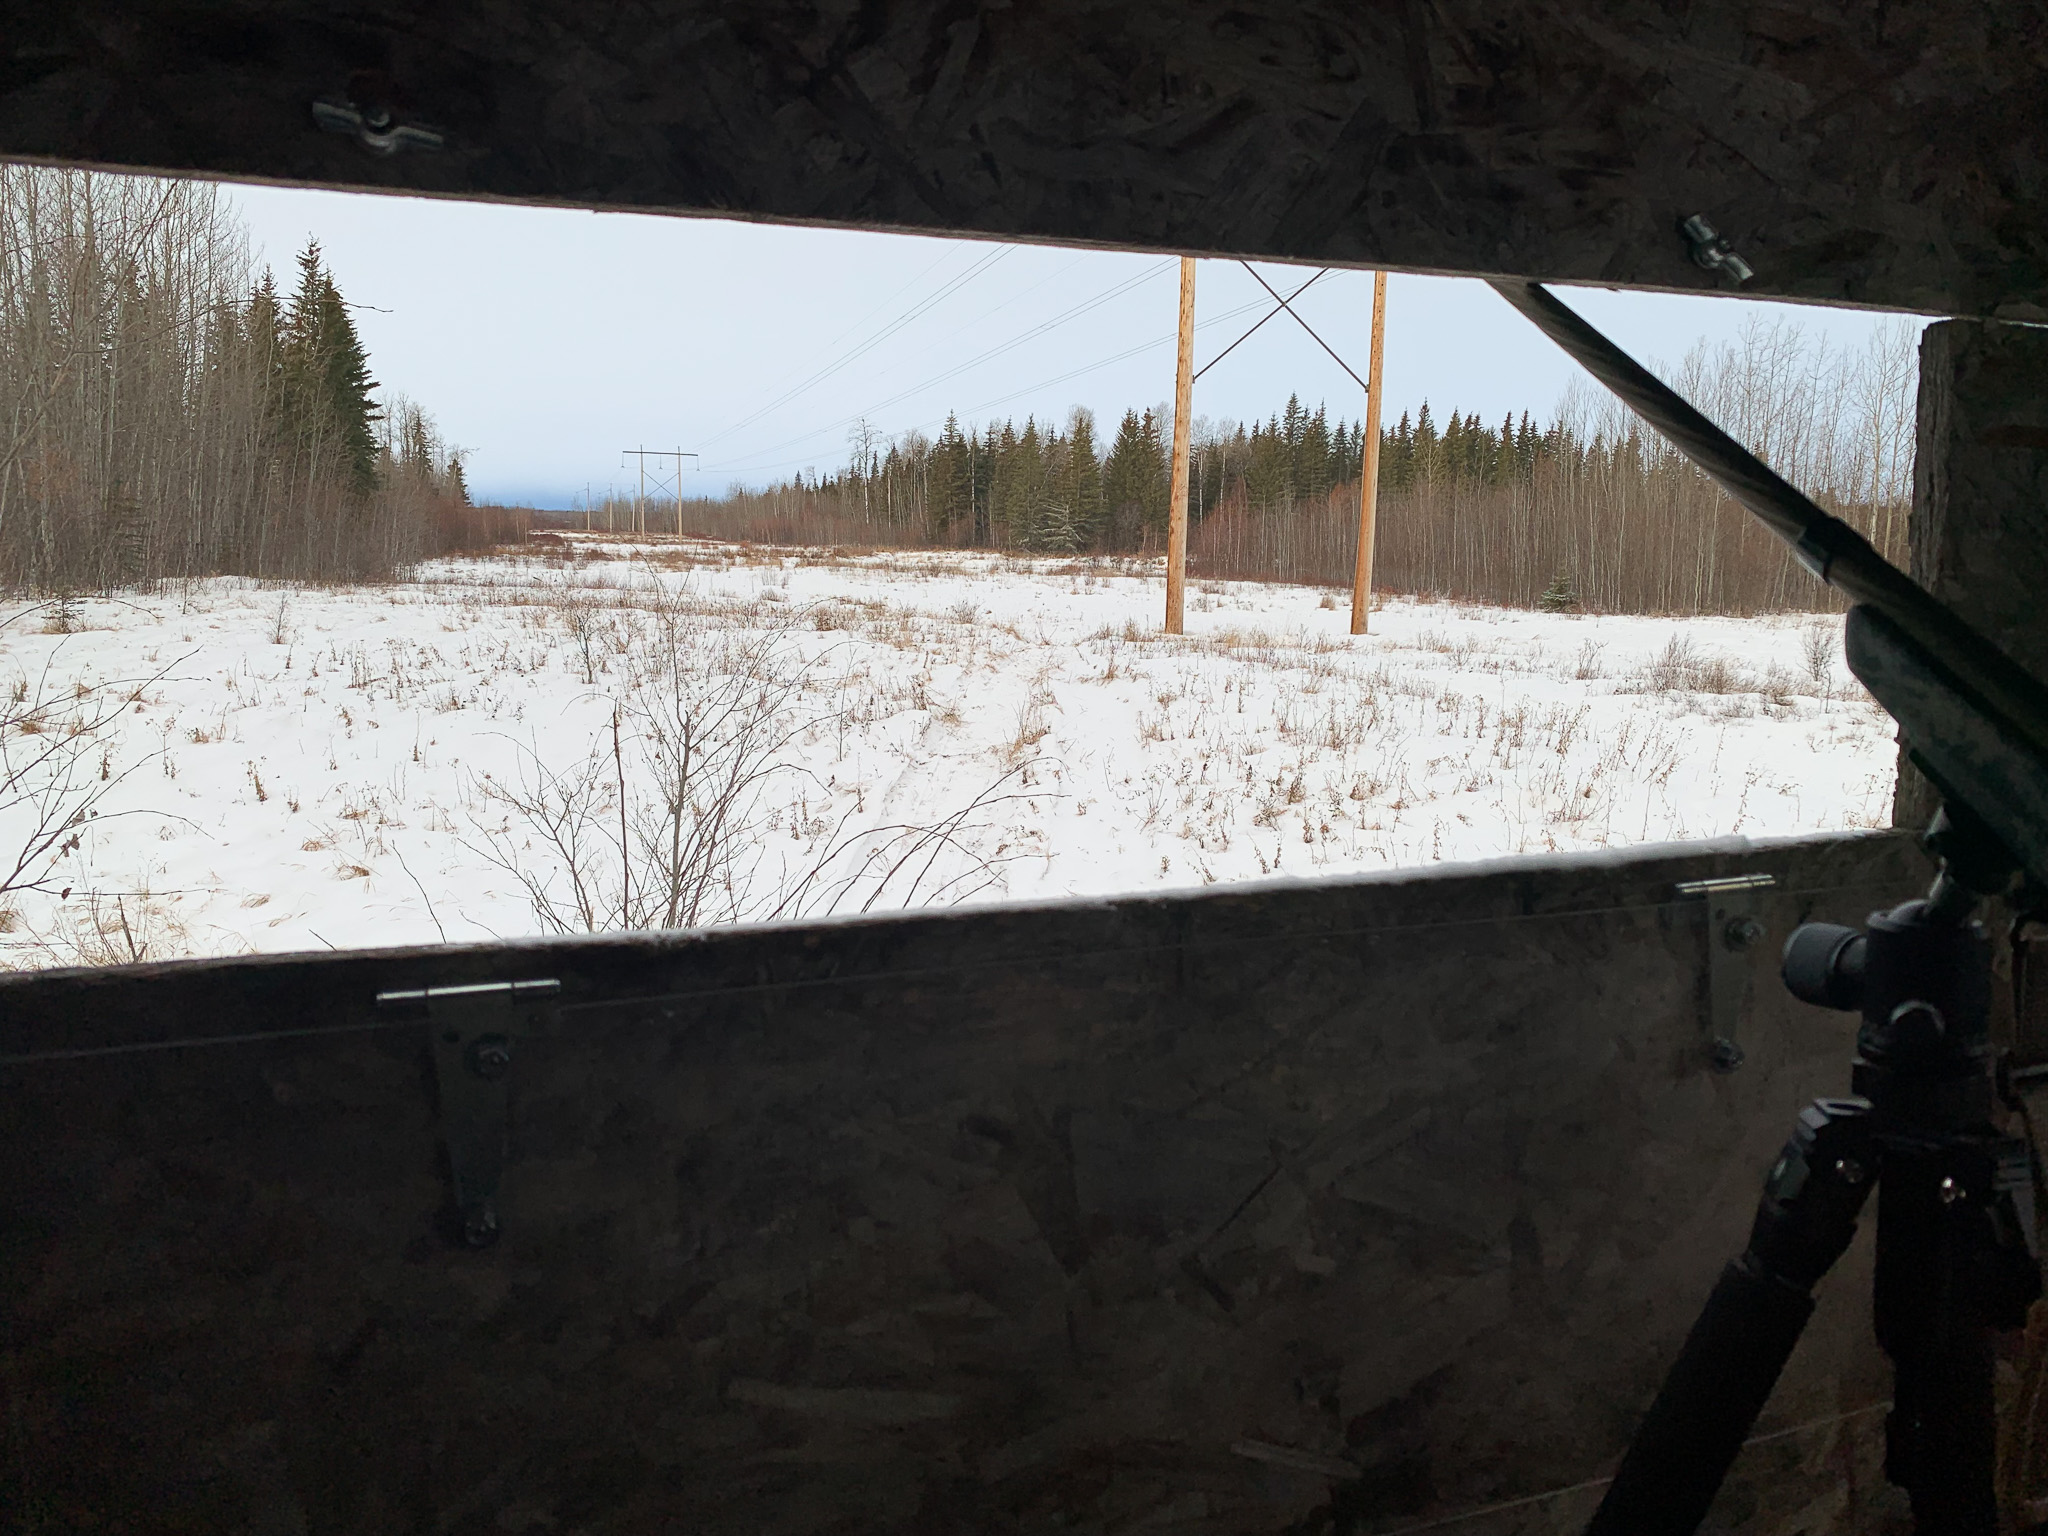 The snowy view of a powerline cut from a plywood box blind in Alberta.